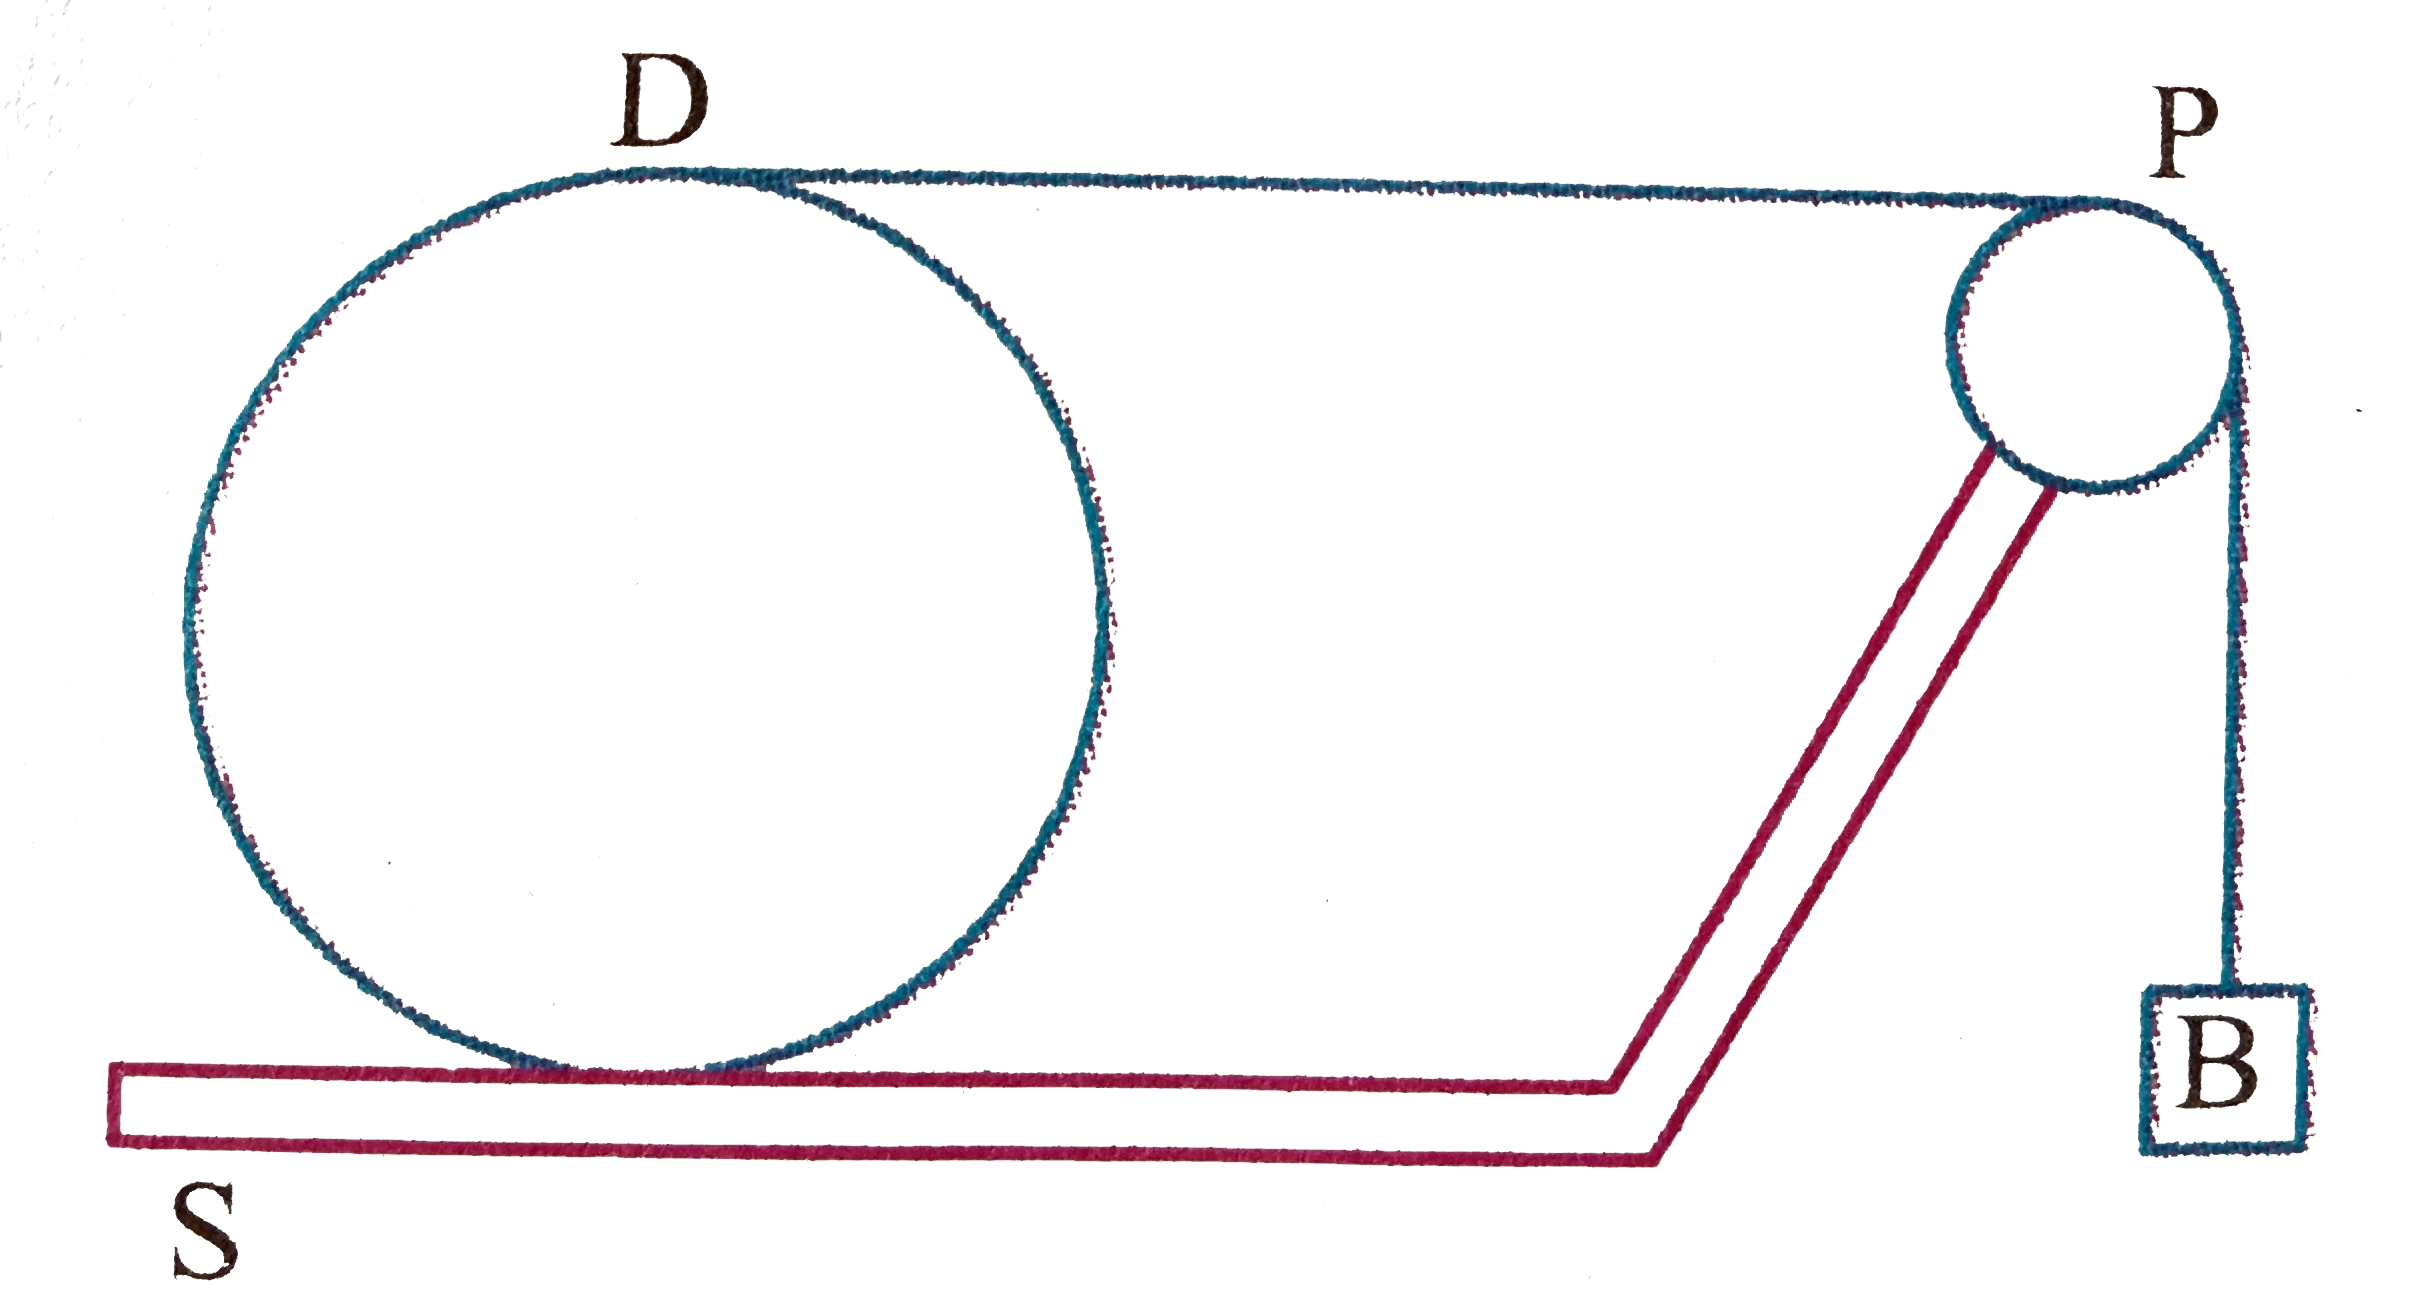 In the figure, the disc D does not slip on the surface S, the pulley P has mass and the string does not slip on it. The string is wound around the disc.